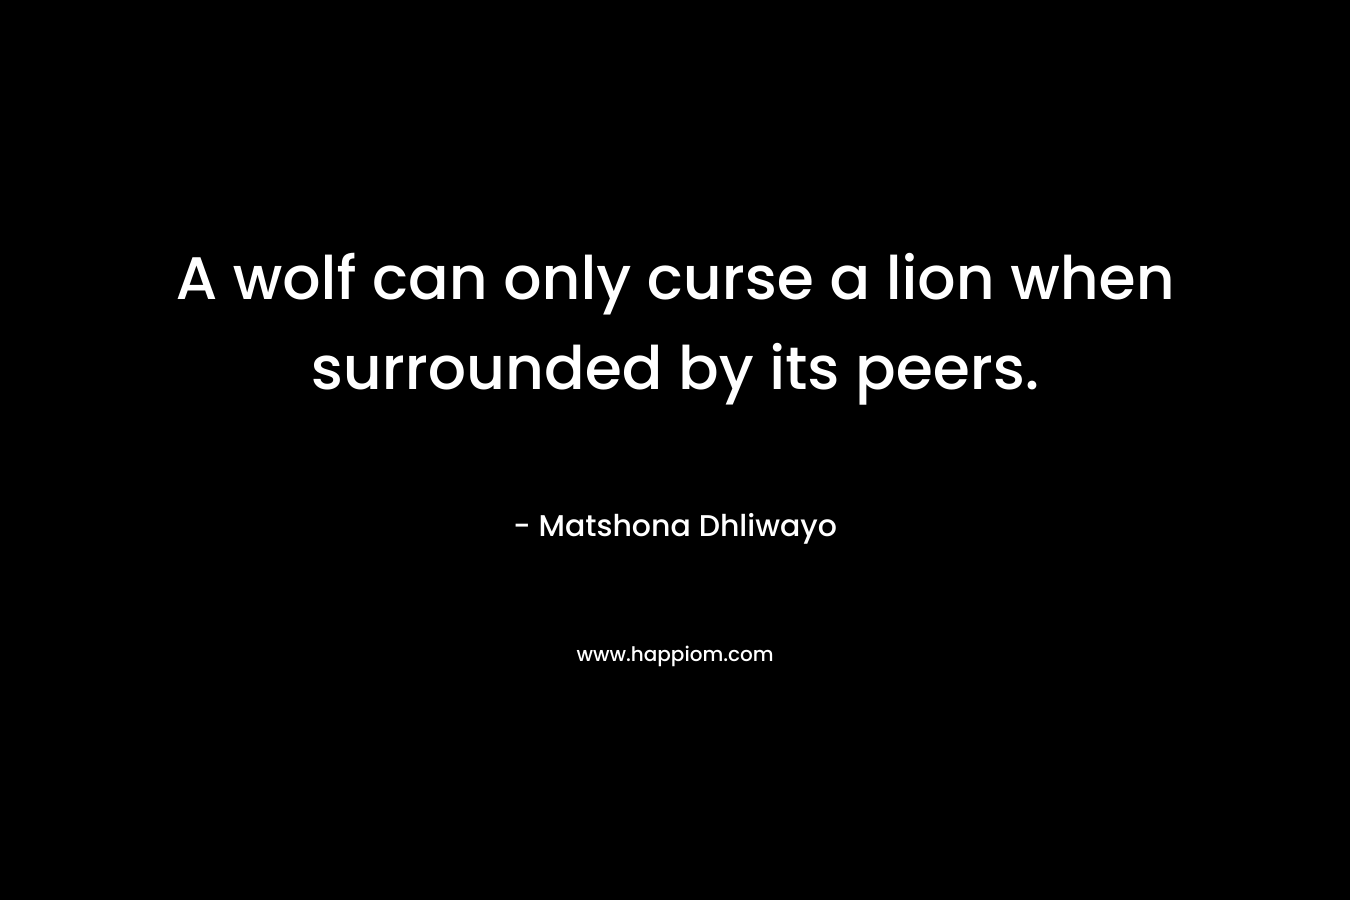 A wolf can only curse a lion when surrounded by its peers.